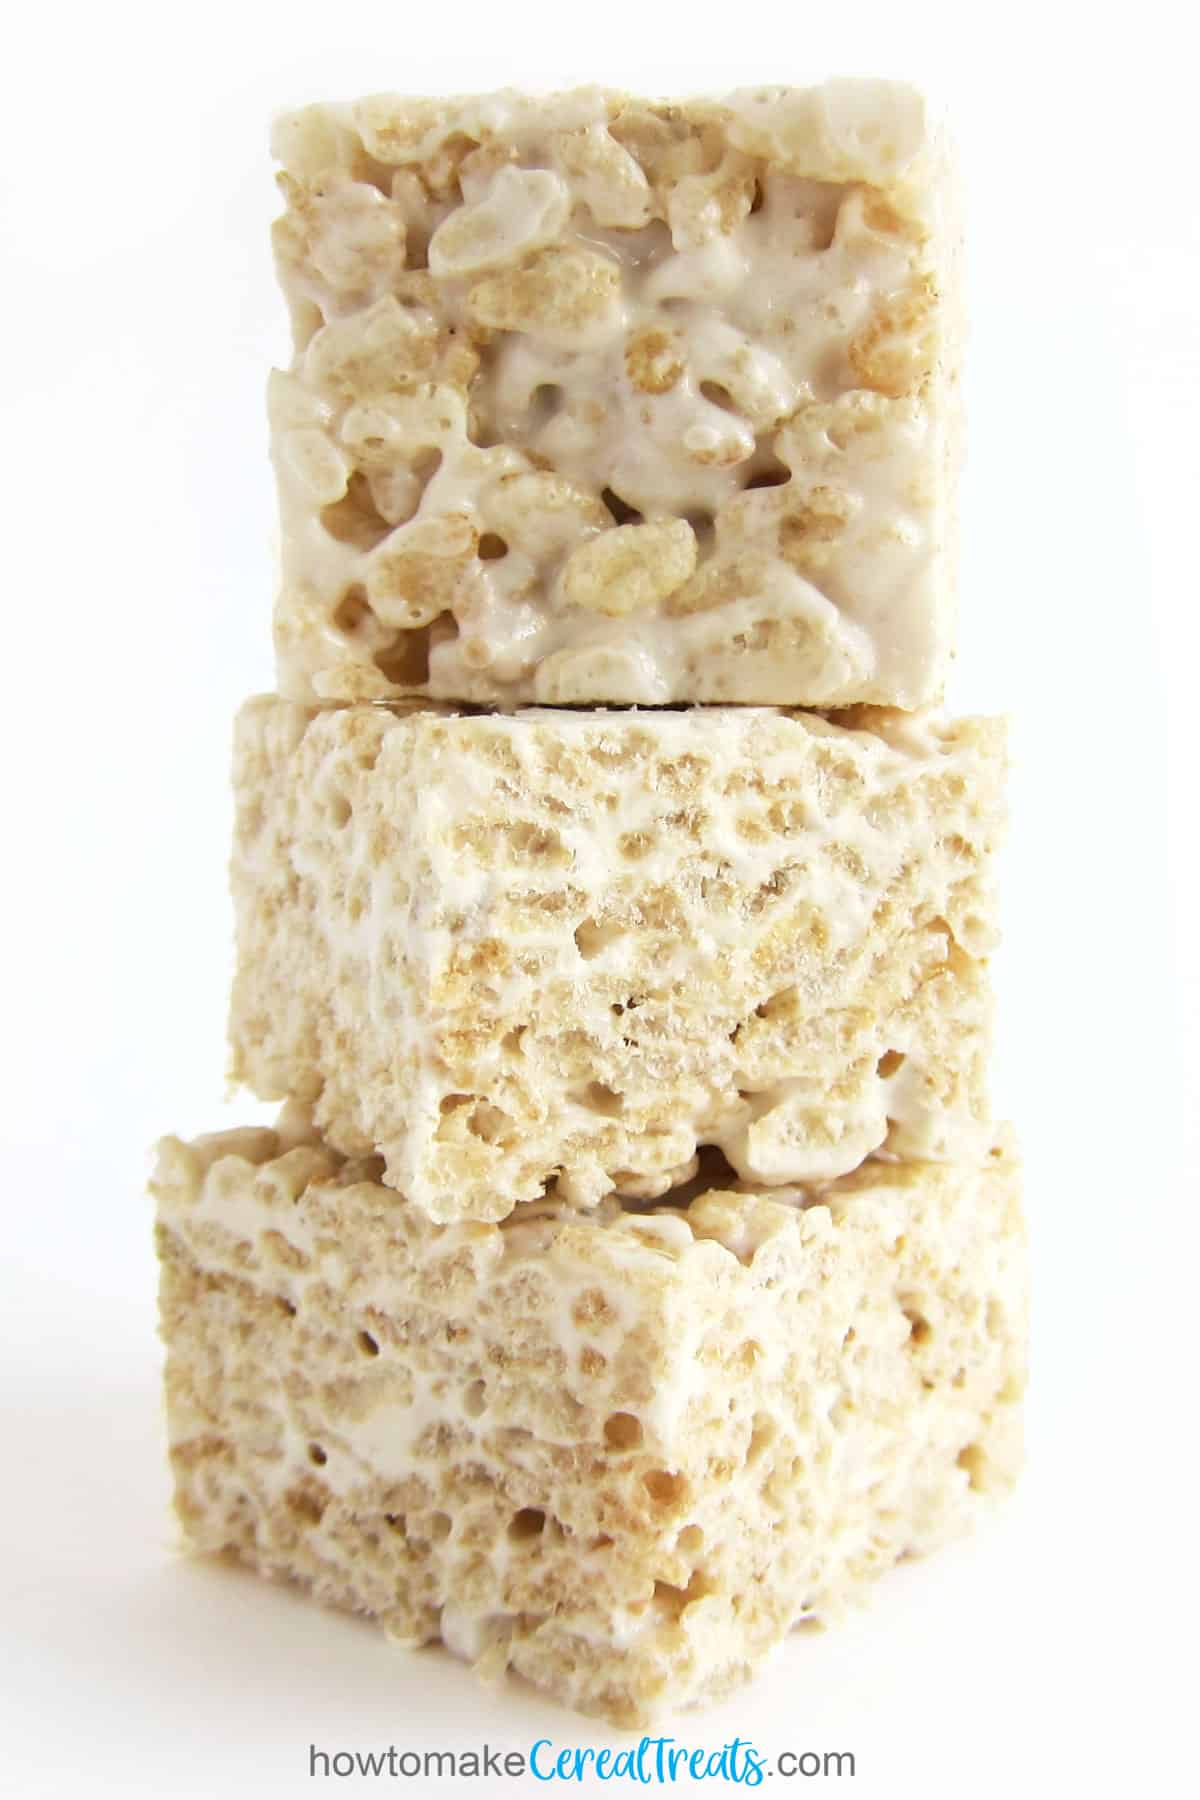 healthy rice krispie treats made using coconut oil, Smashmallows, and brown rice crispy cereal